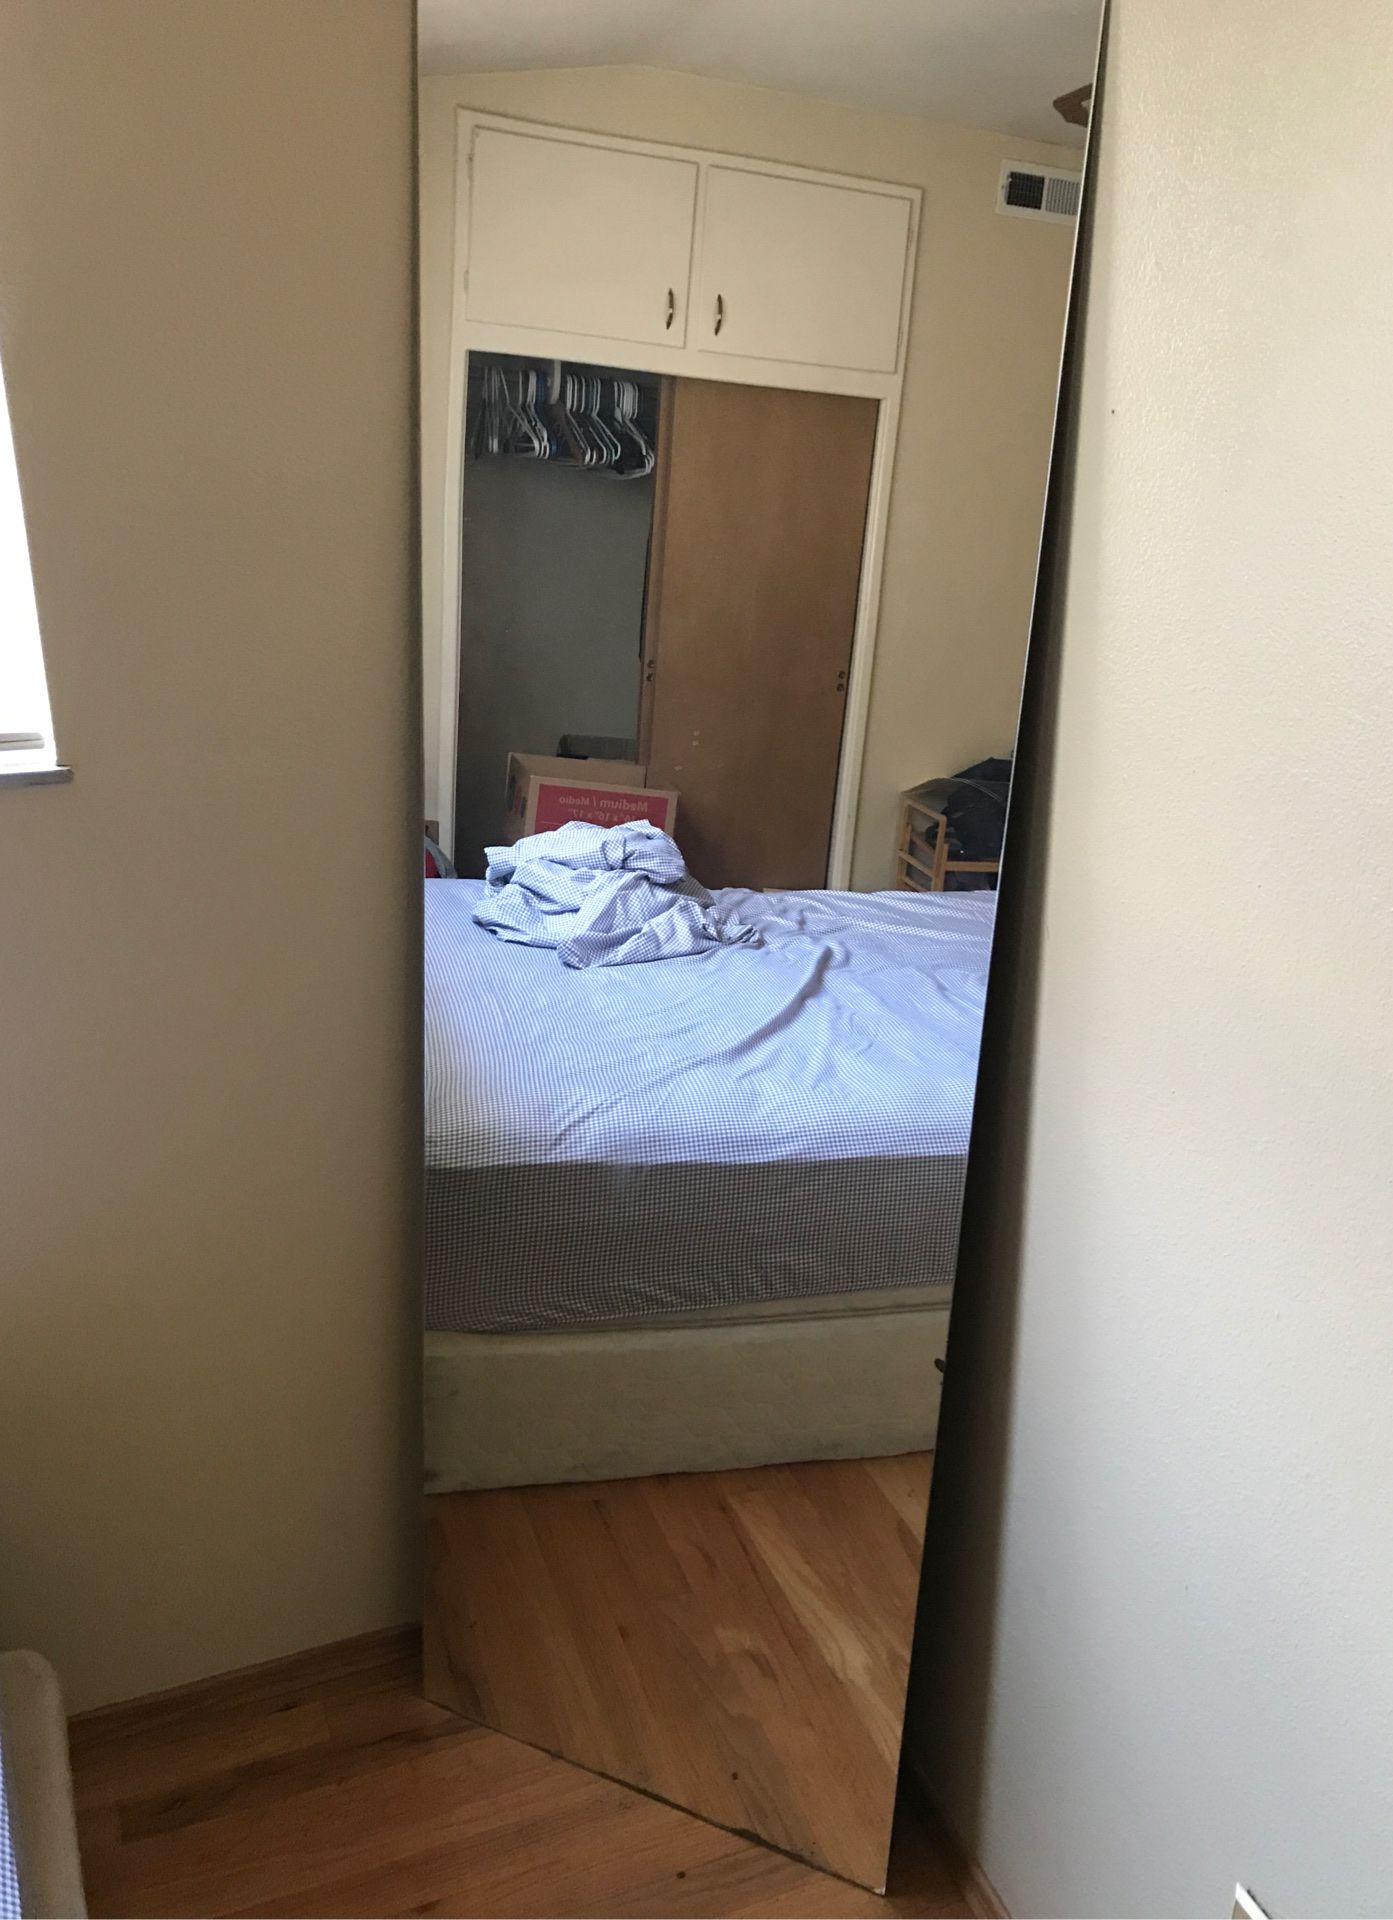 Nearly 6 ft tall standing mirror